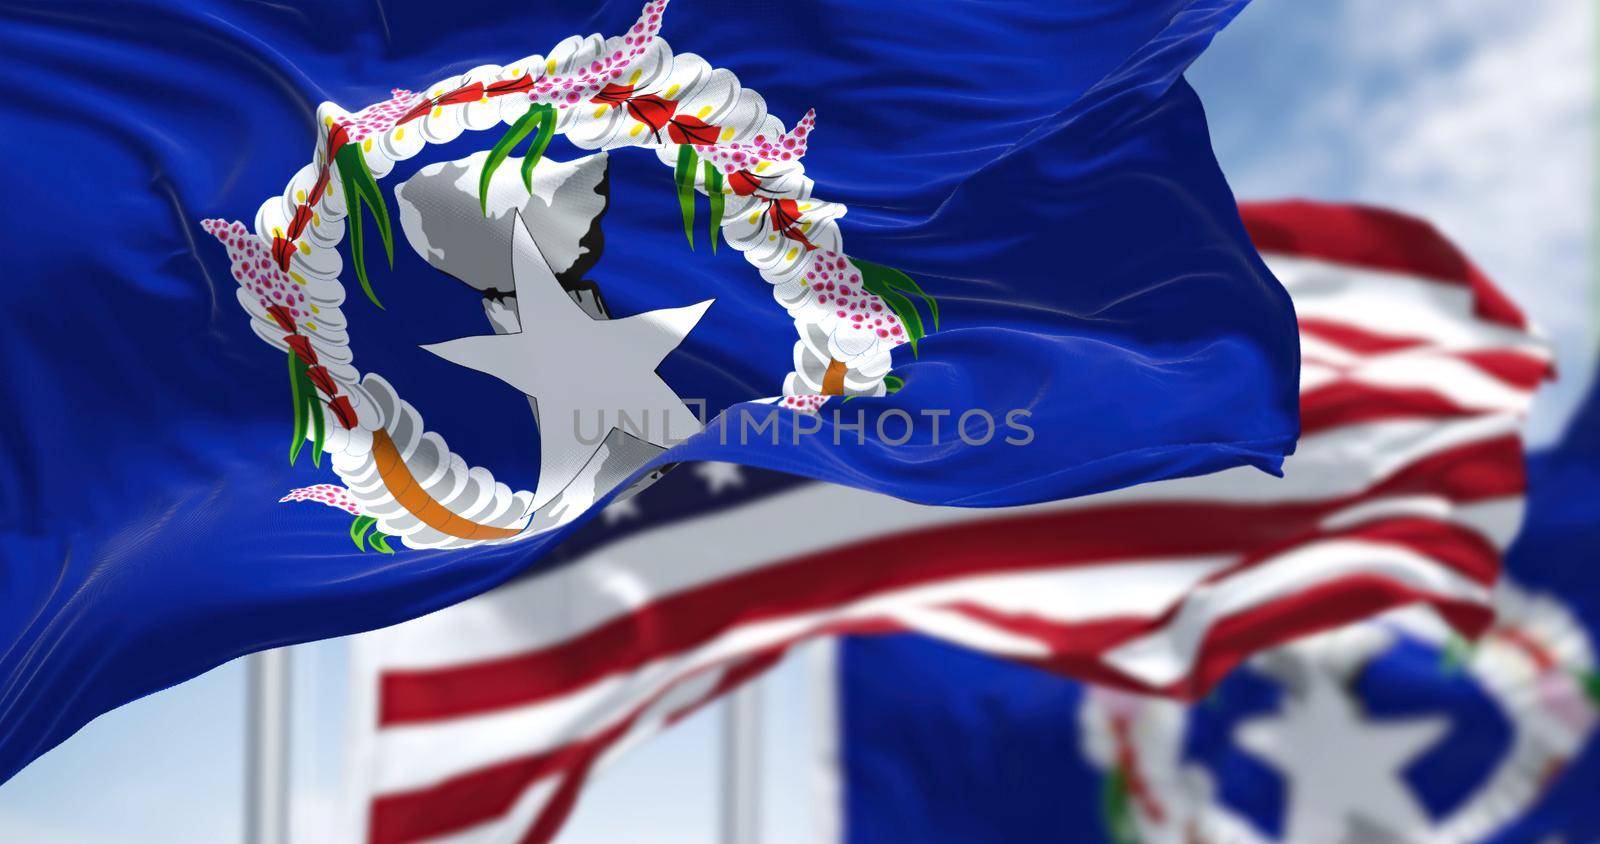 Flags of Northern Mariana Islands waving in the wind with the US flag on a clear day. The Northern Mariana Islands are an unincorporated territory and commonwealth of the United States